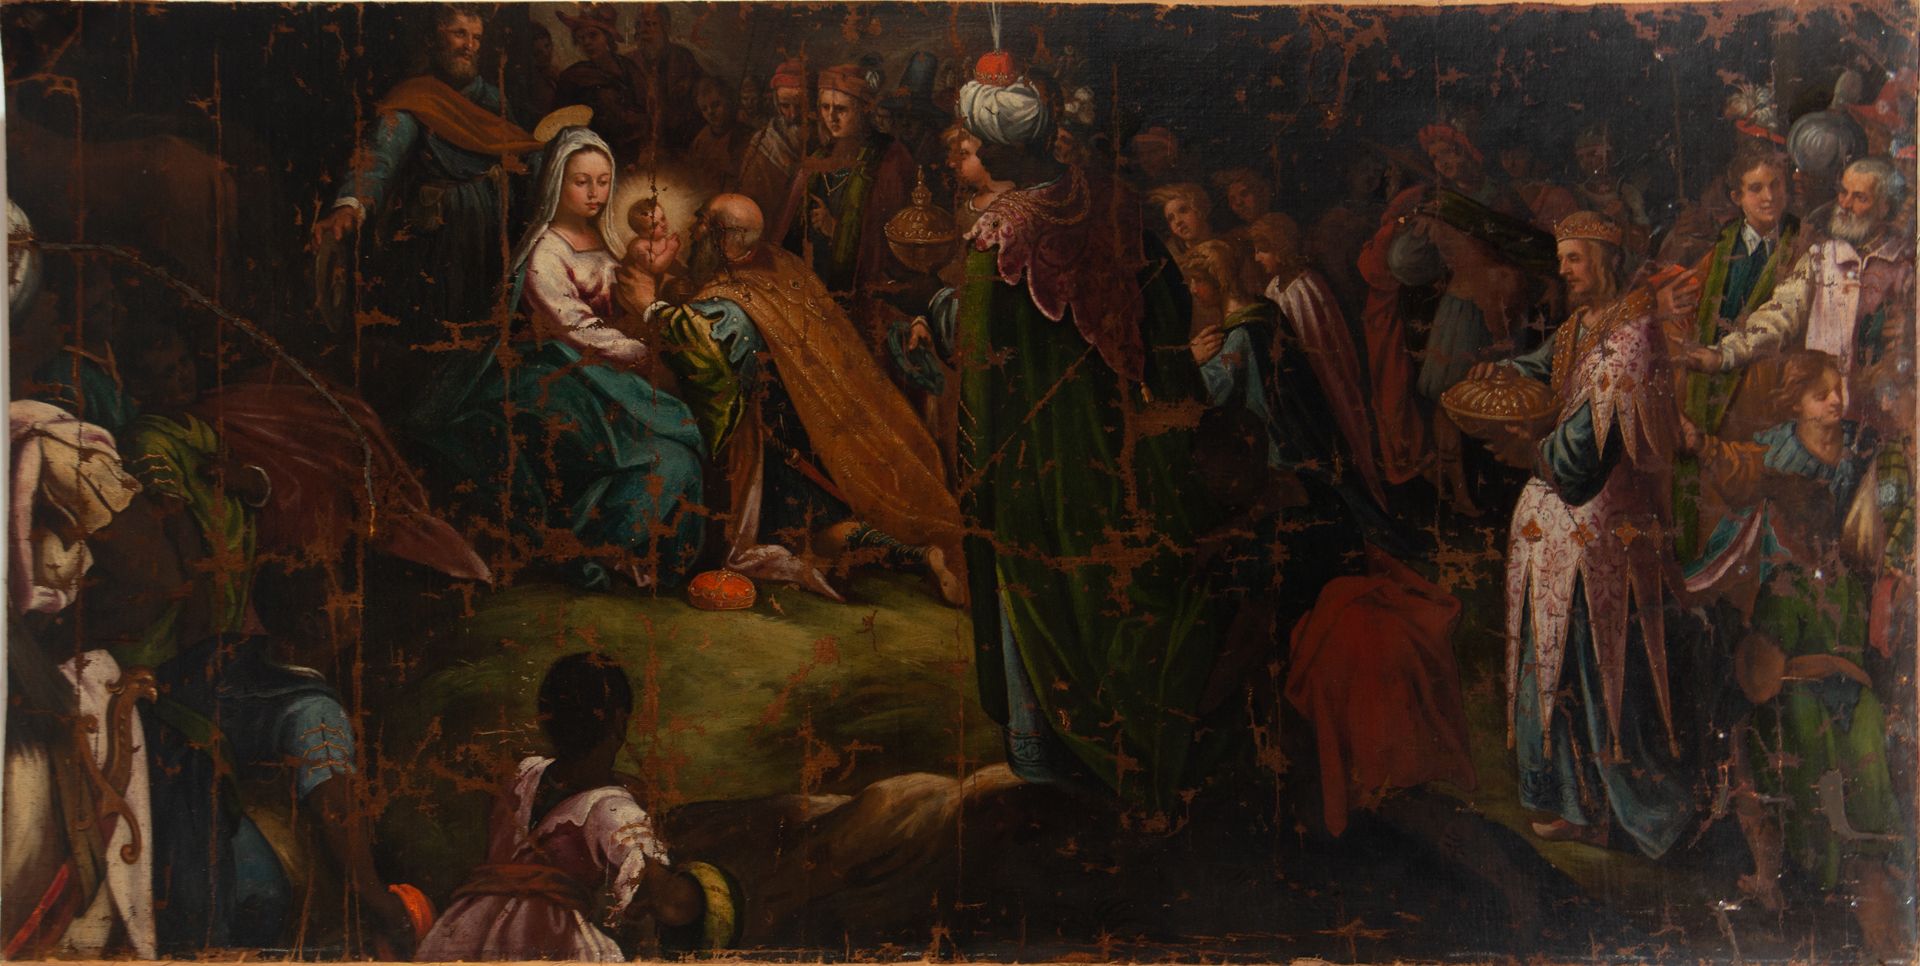 "The Adoration of the Magi", Andalusian school of the 17th century, circle of Francisco Pacheco